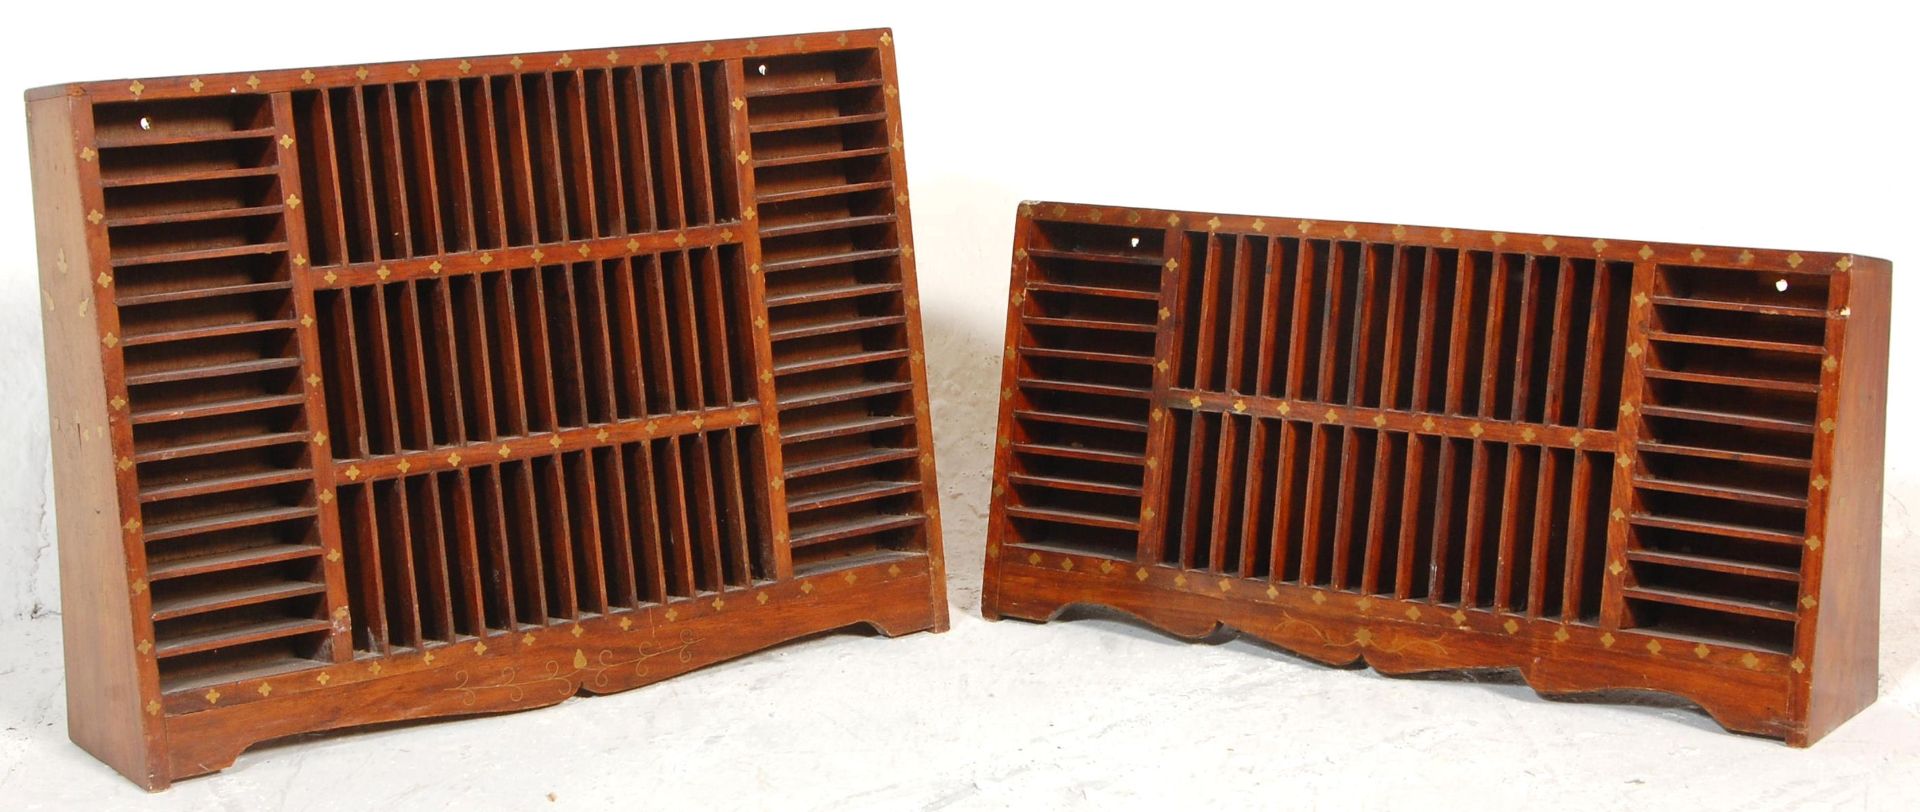 Two inlaid Indian hardwood tape racks having vertical and horizontal slots with decorative brass